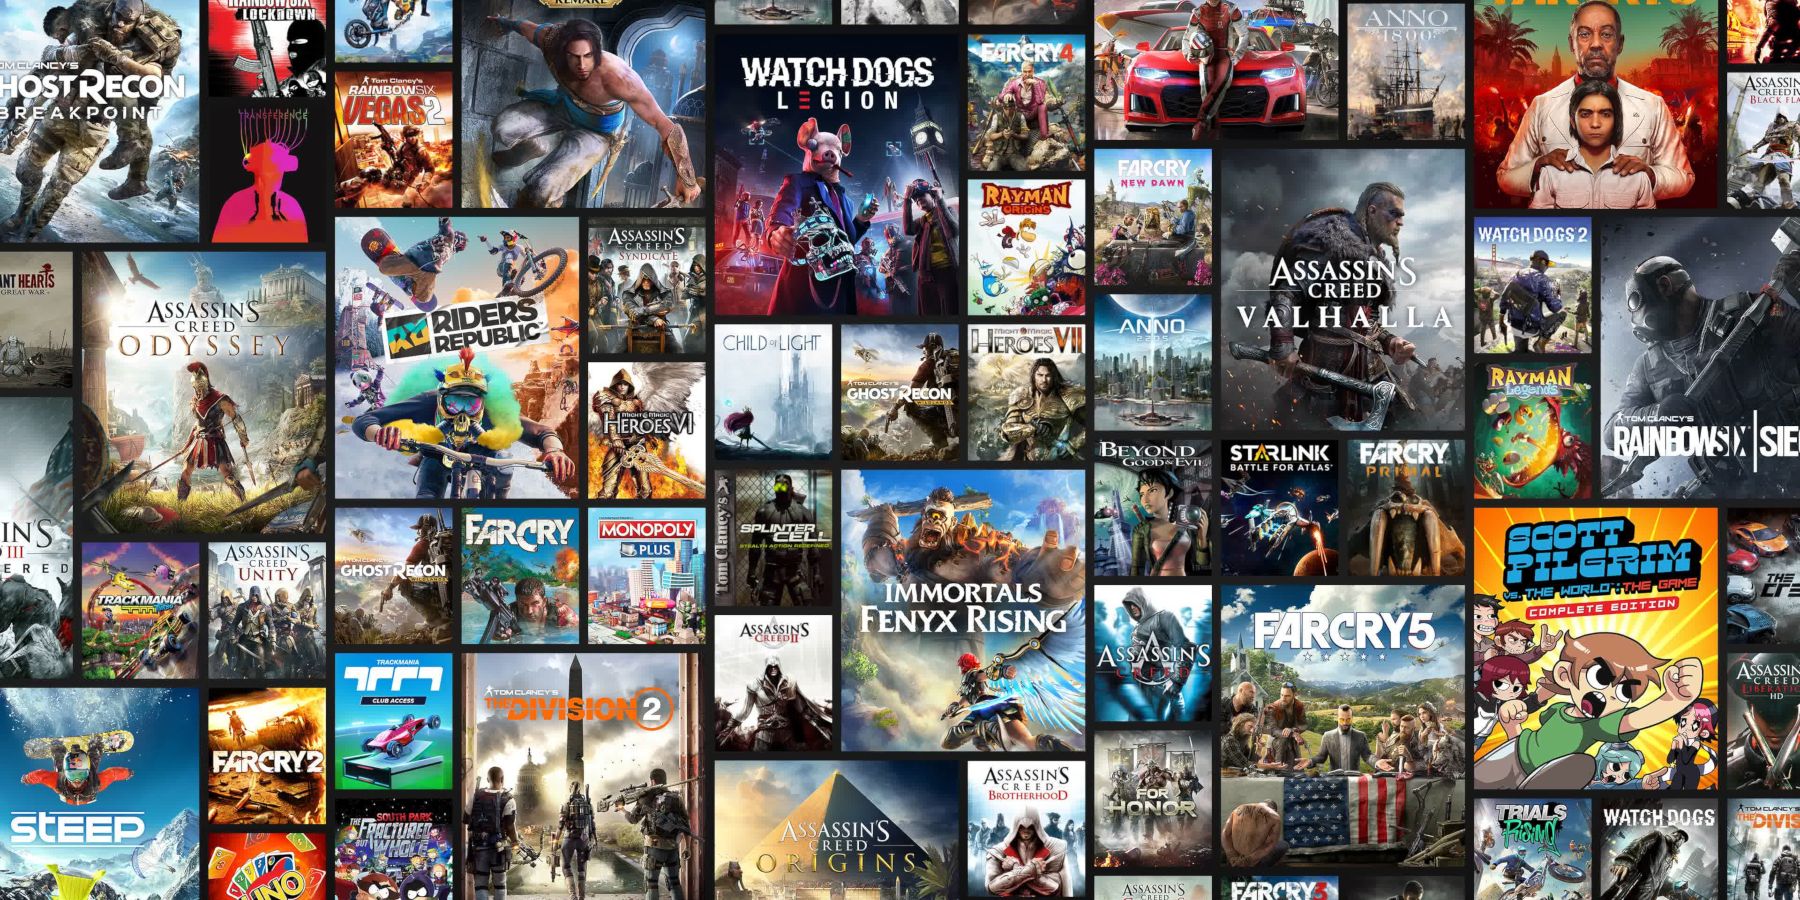 ubisoft games from the past several years